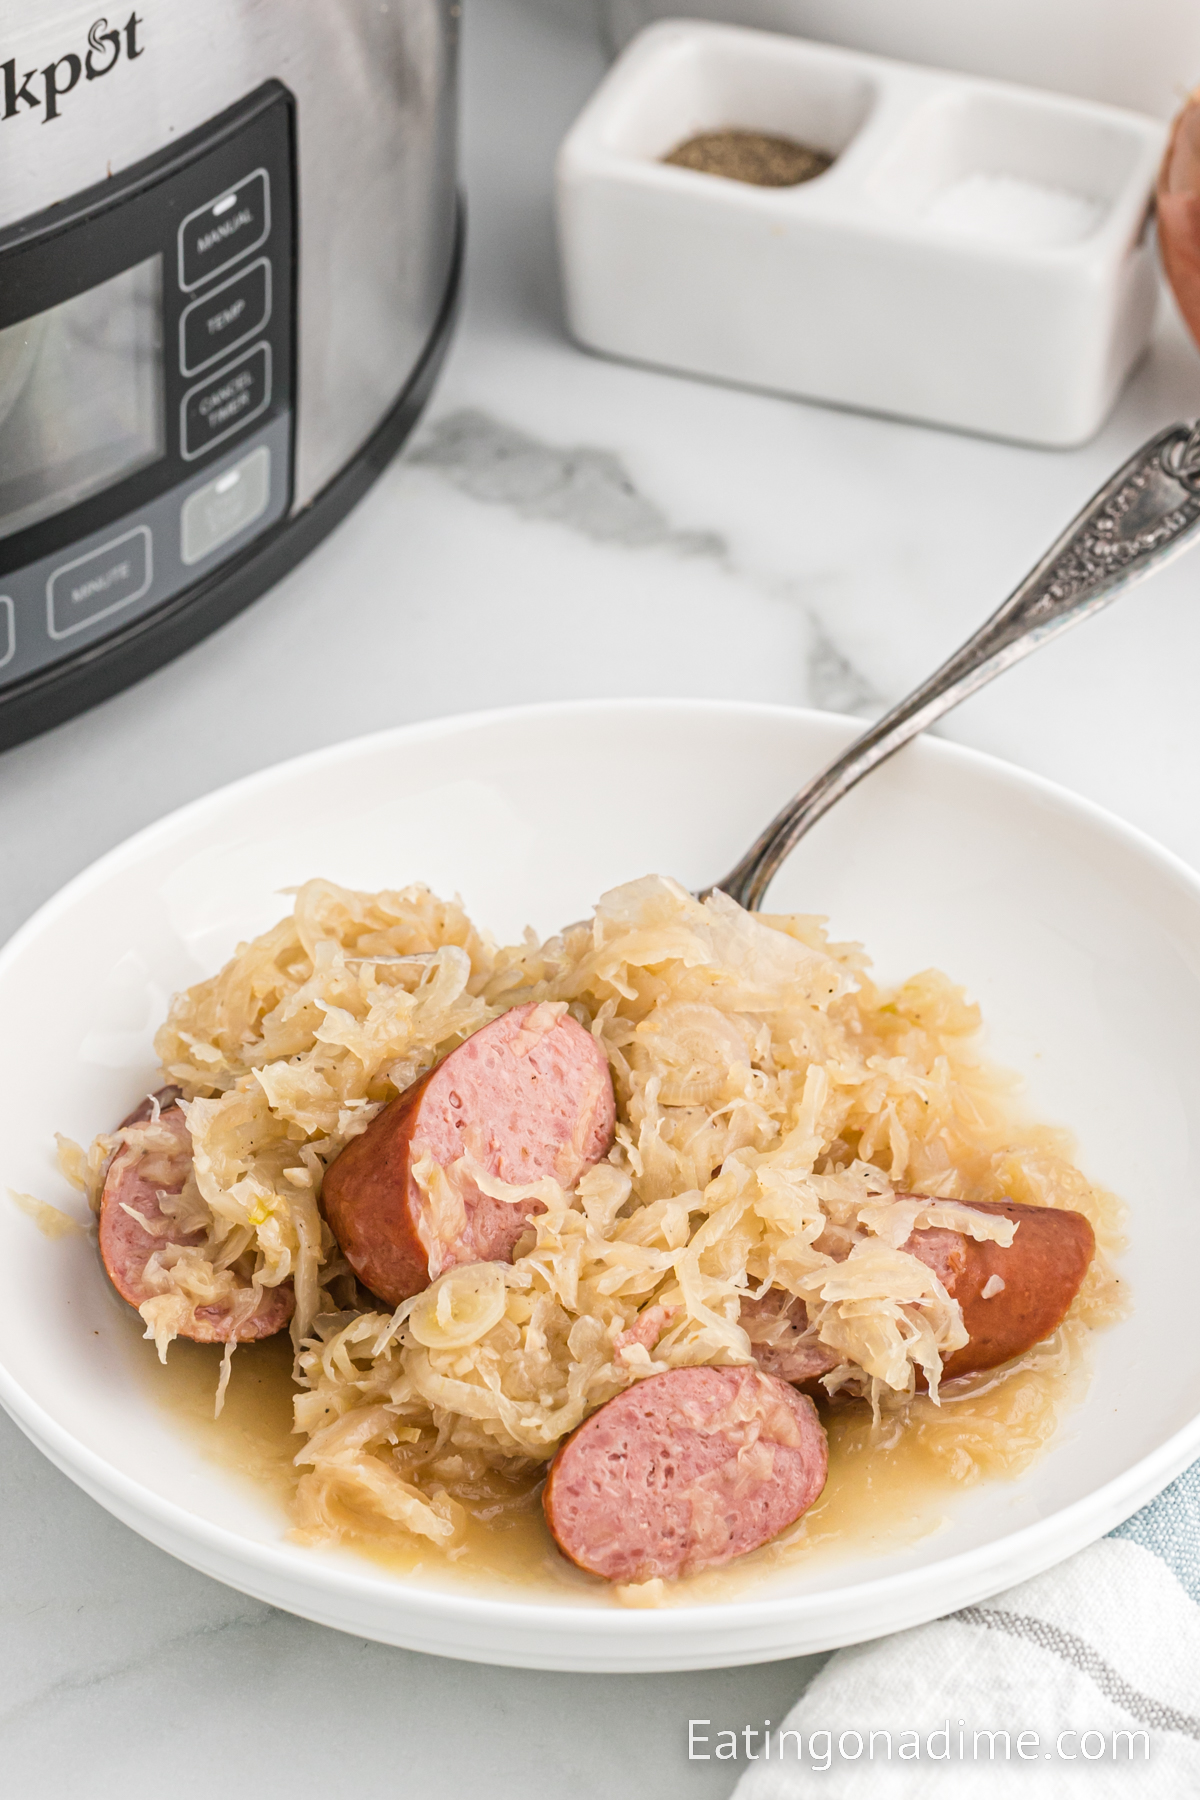 Sauerkraut and slice sausage on a white plate with a fork